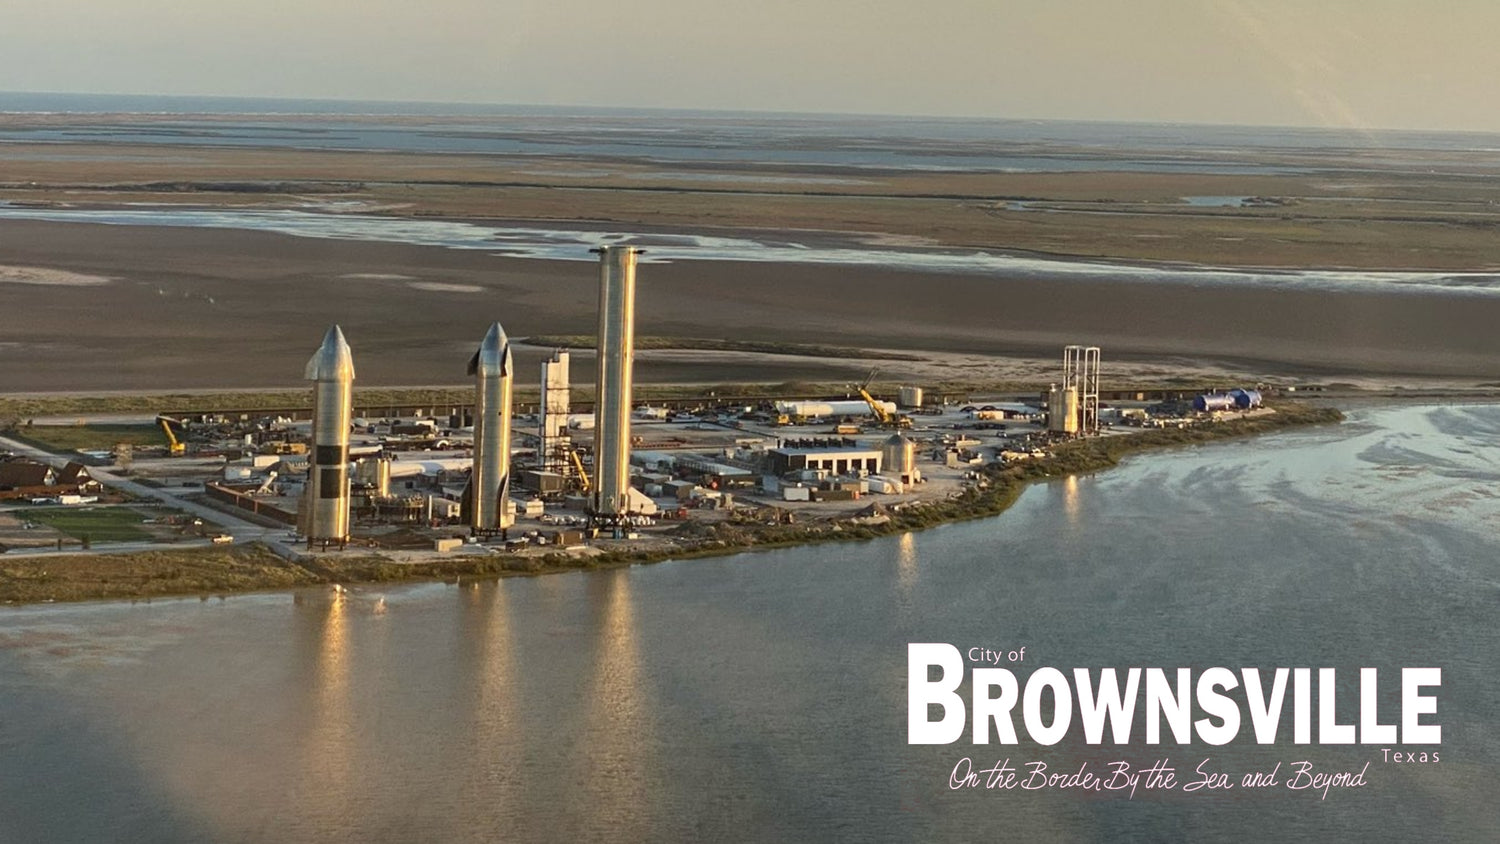 SpaceX Inspires New City of Brownsville Slogan –‘On the Border by the Sea and Beyond!’